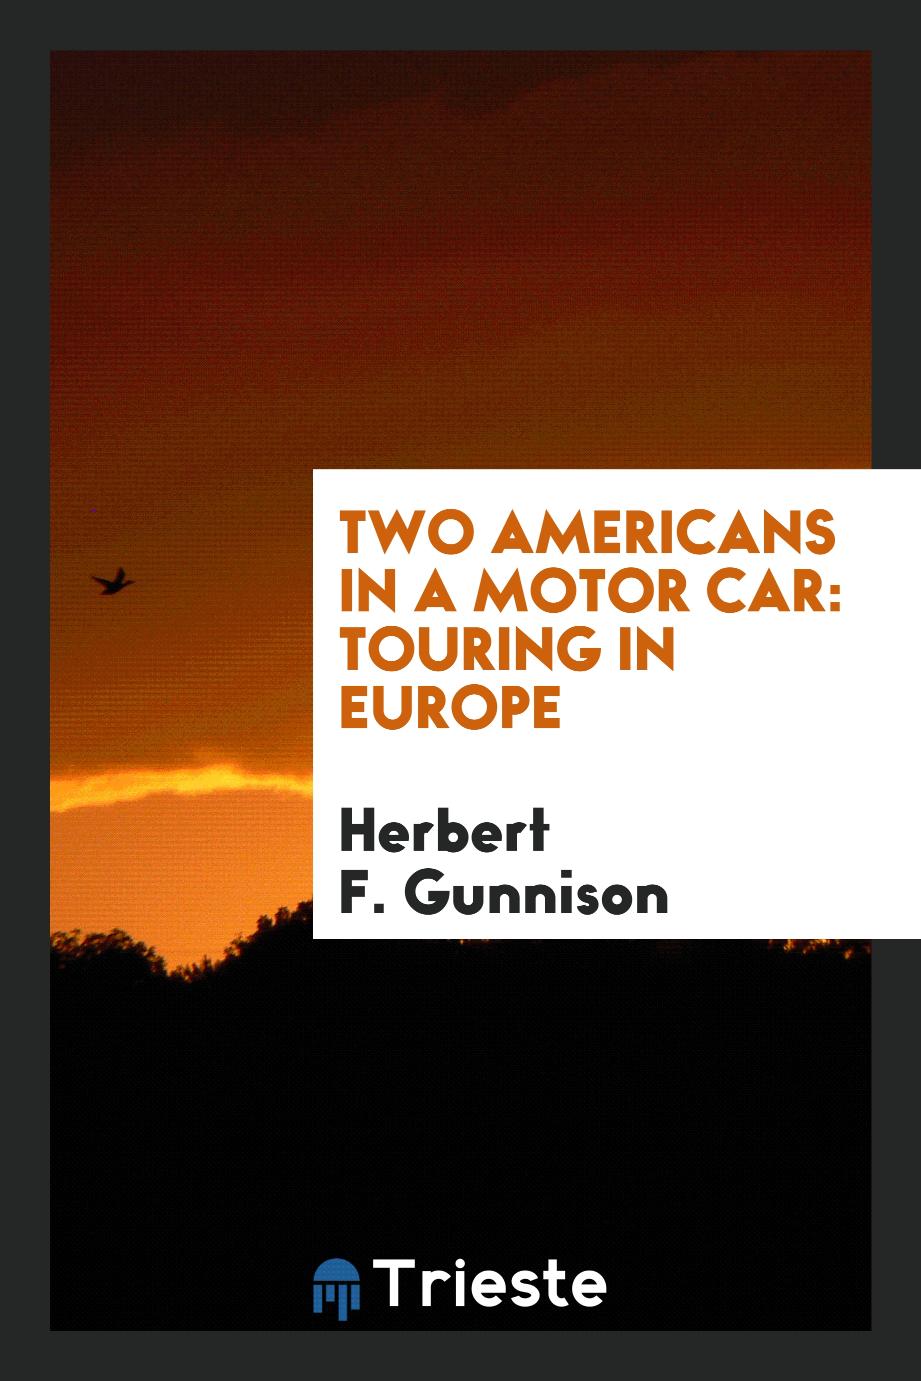 Two Americans in a Motor Car: Touring in Europe